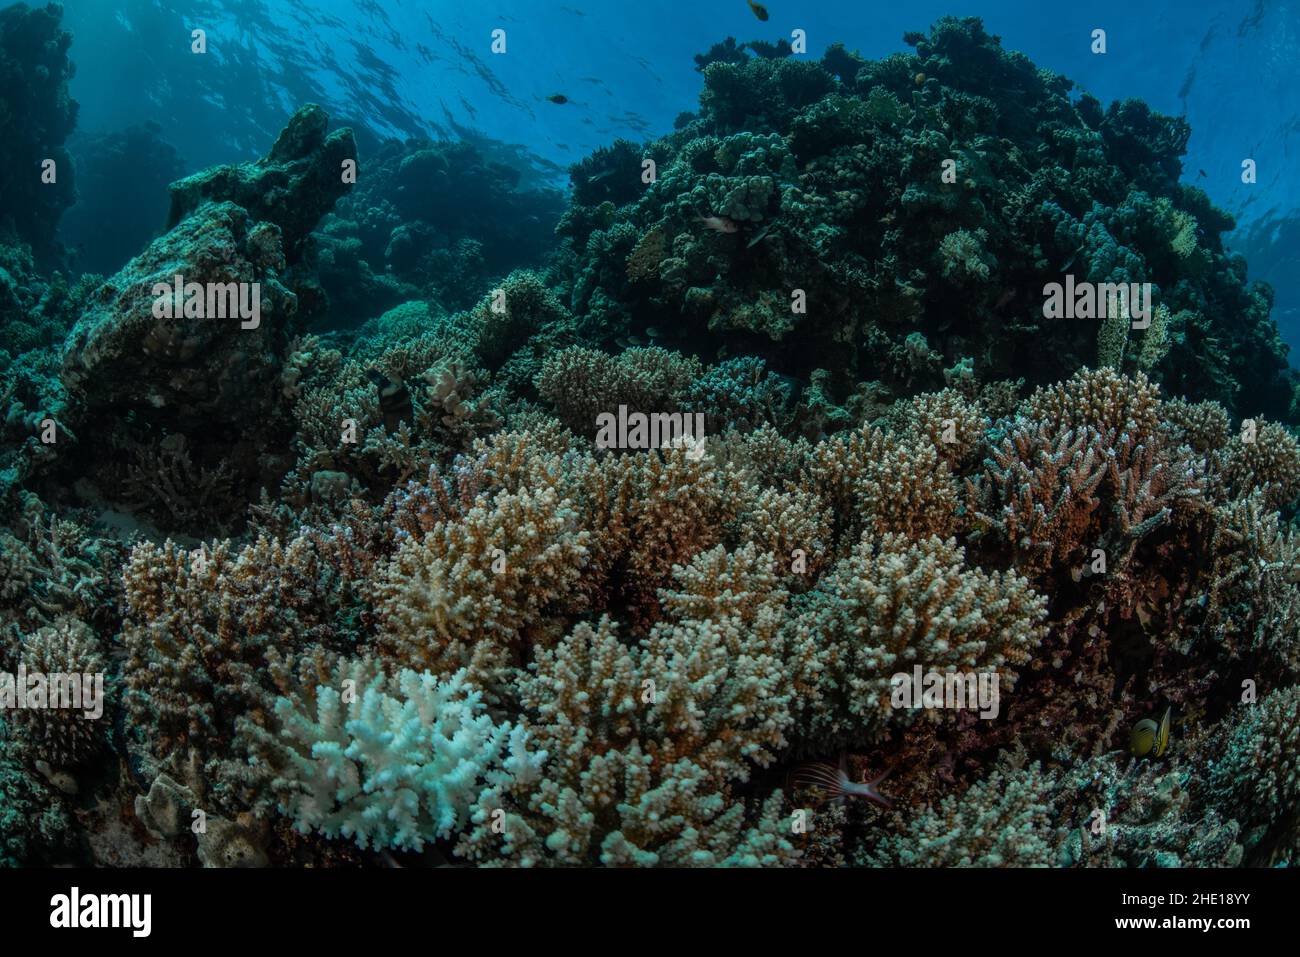 A dense coral reef in the red sea off the coast of Hurghada, Egypt. Stock Photo